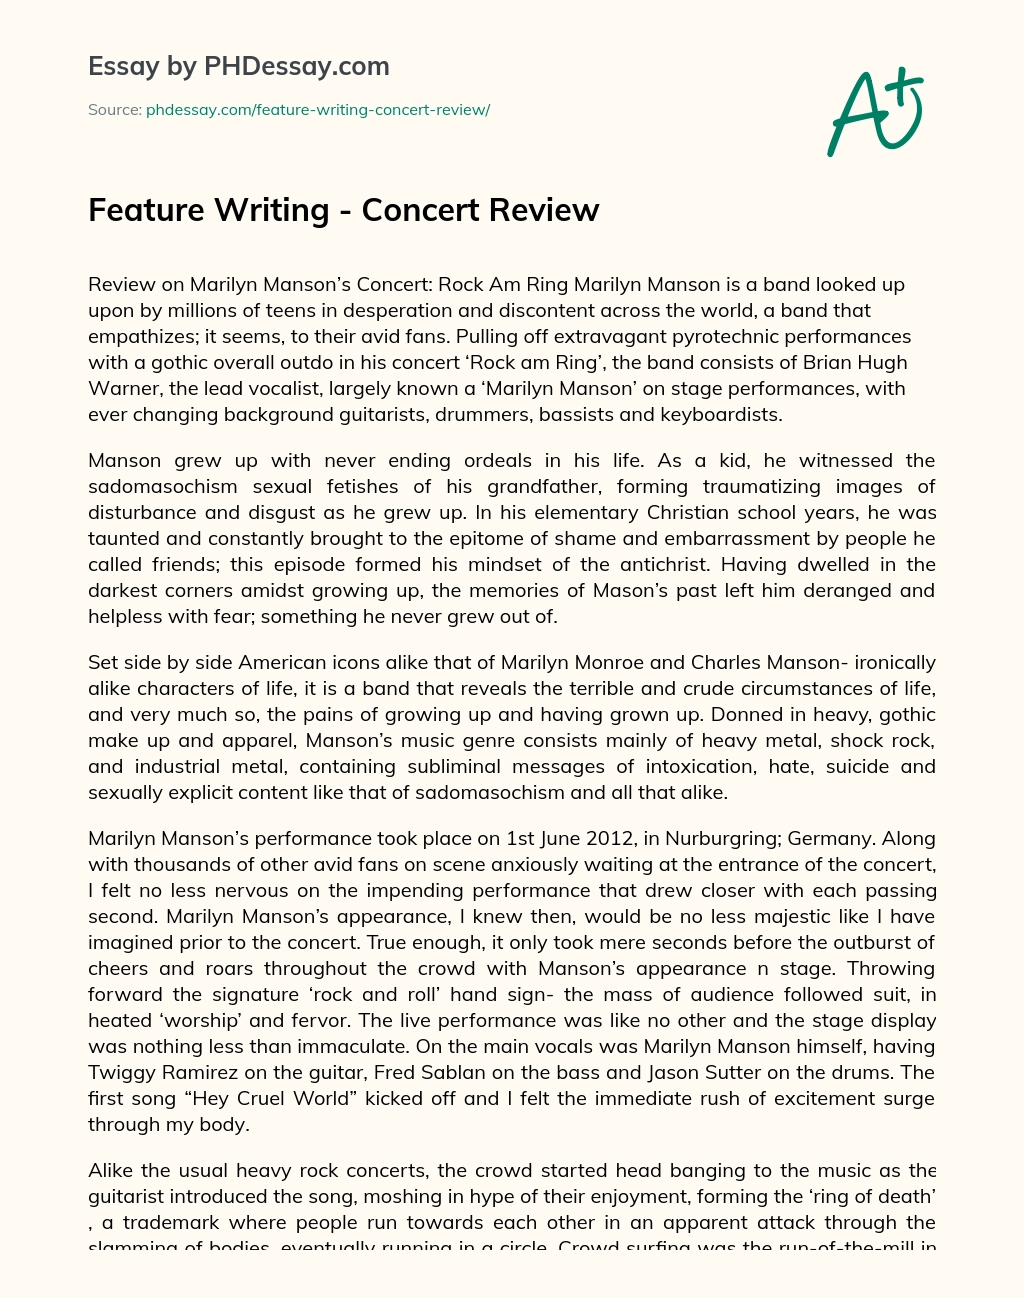 Feature Writing – Concert Review essay